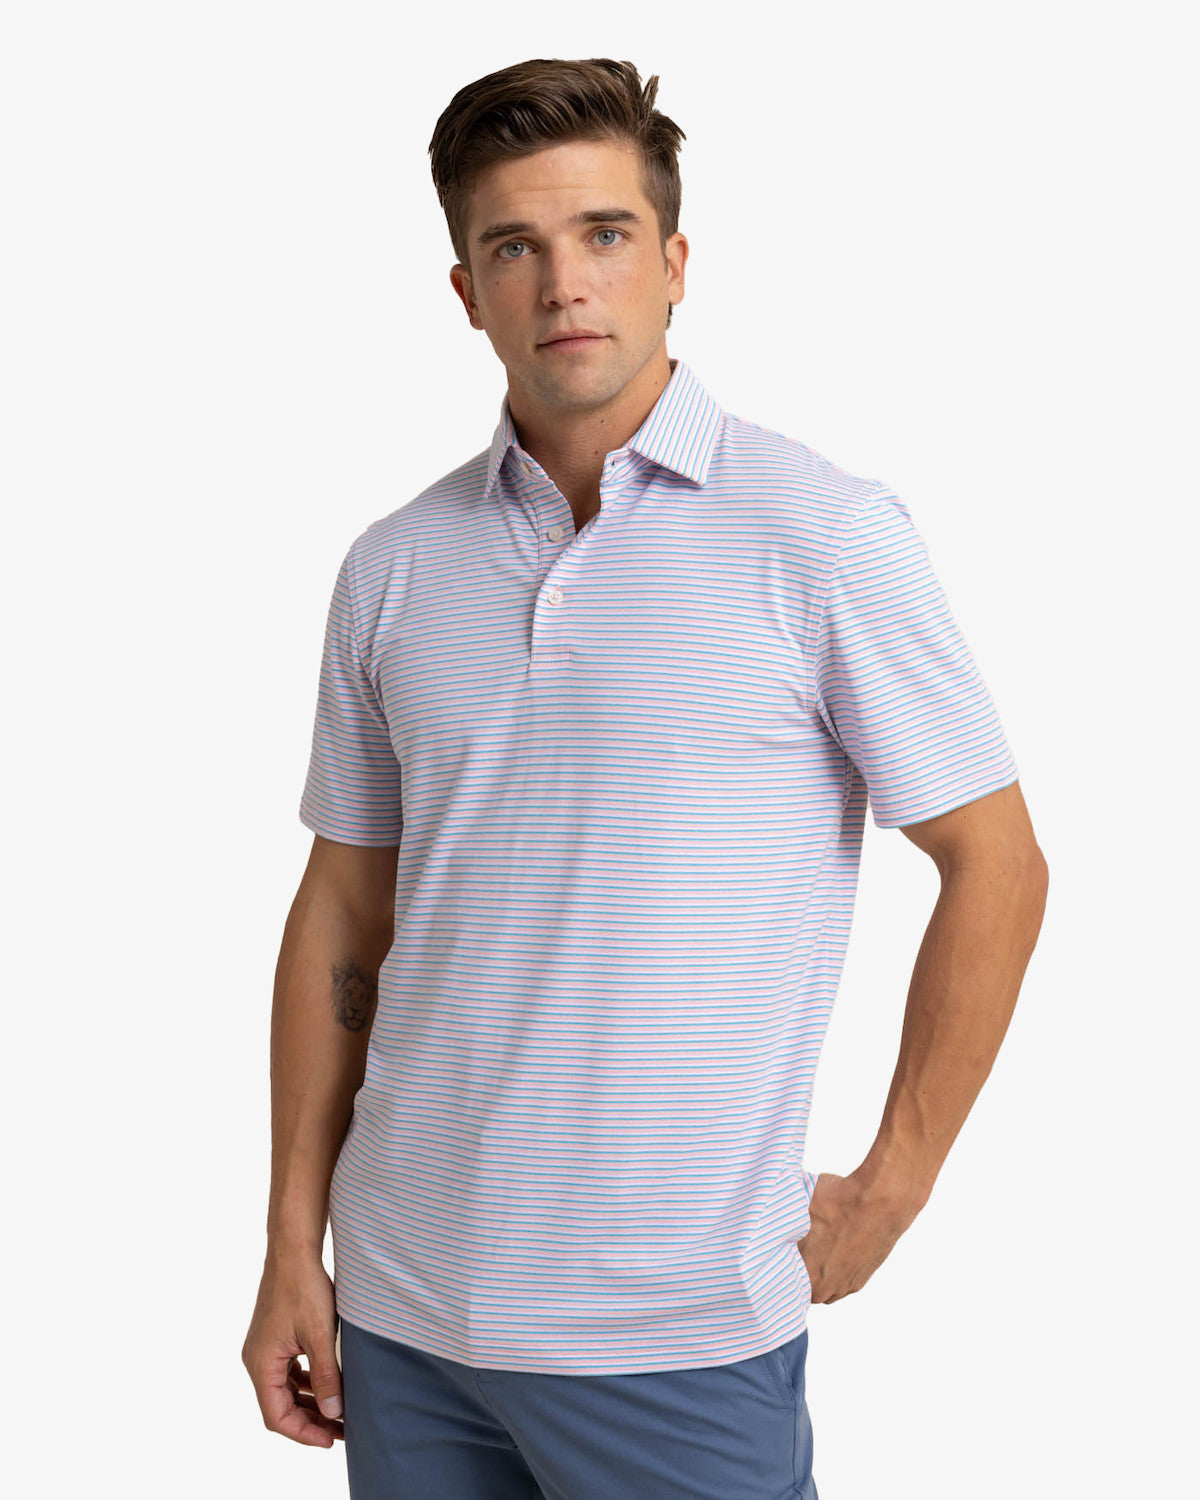 Ryder Halls Heather Performance Polo in Palmer Pink